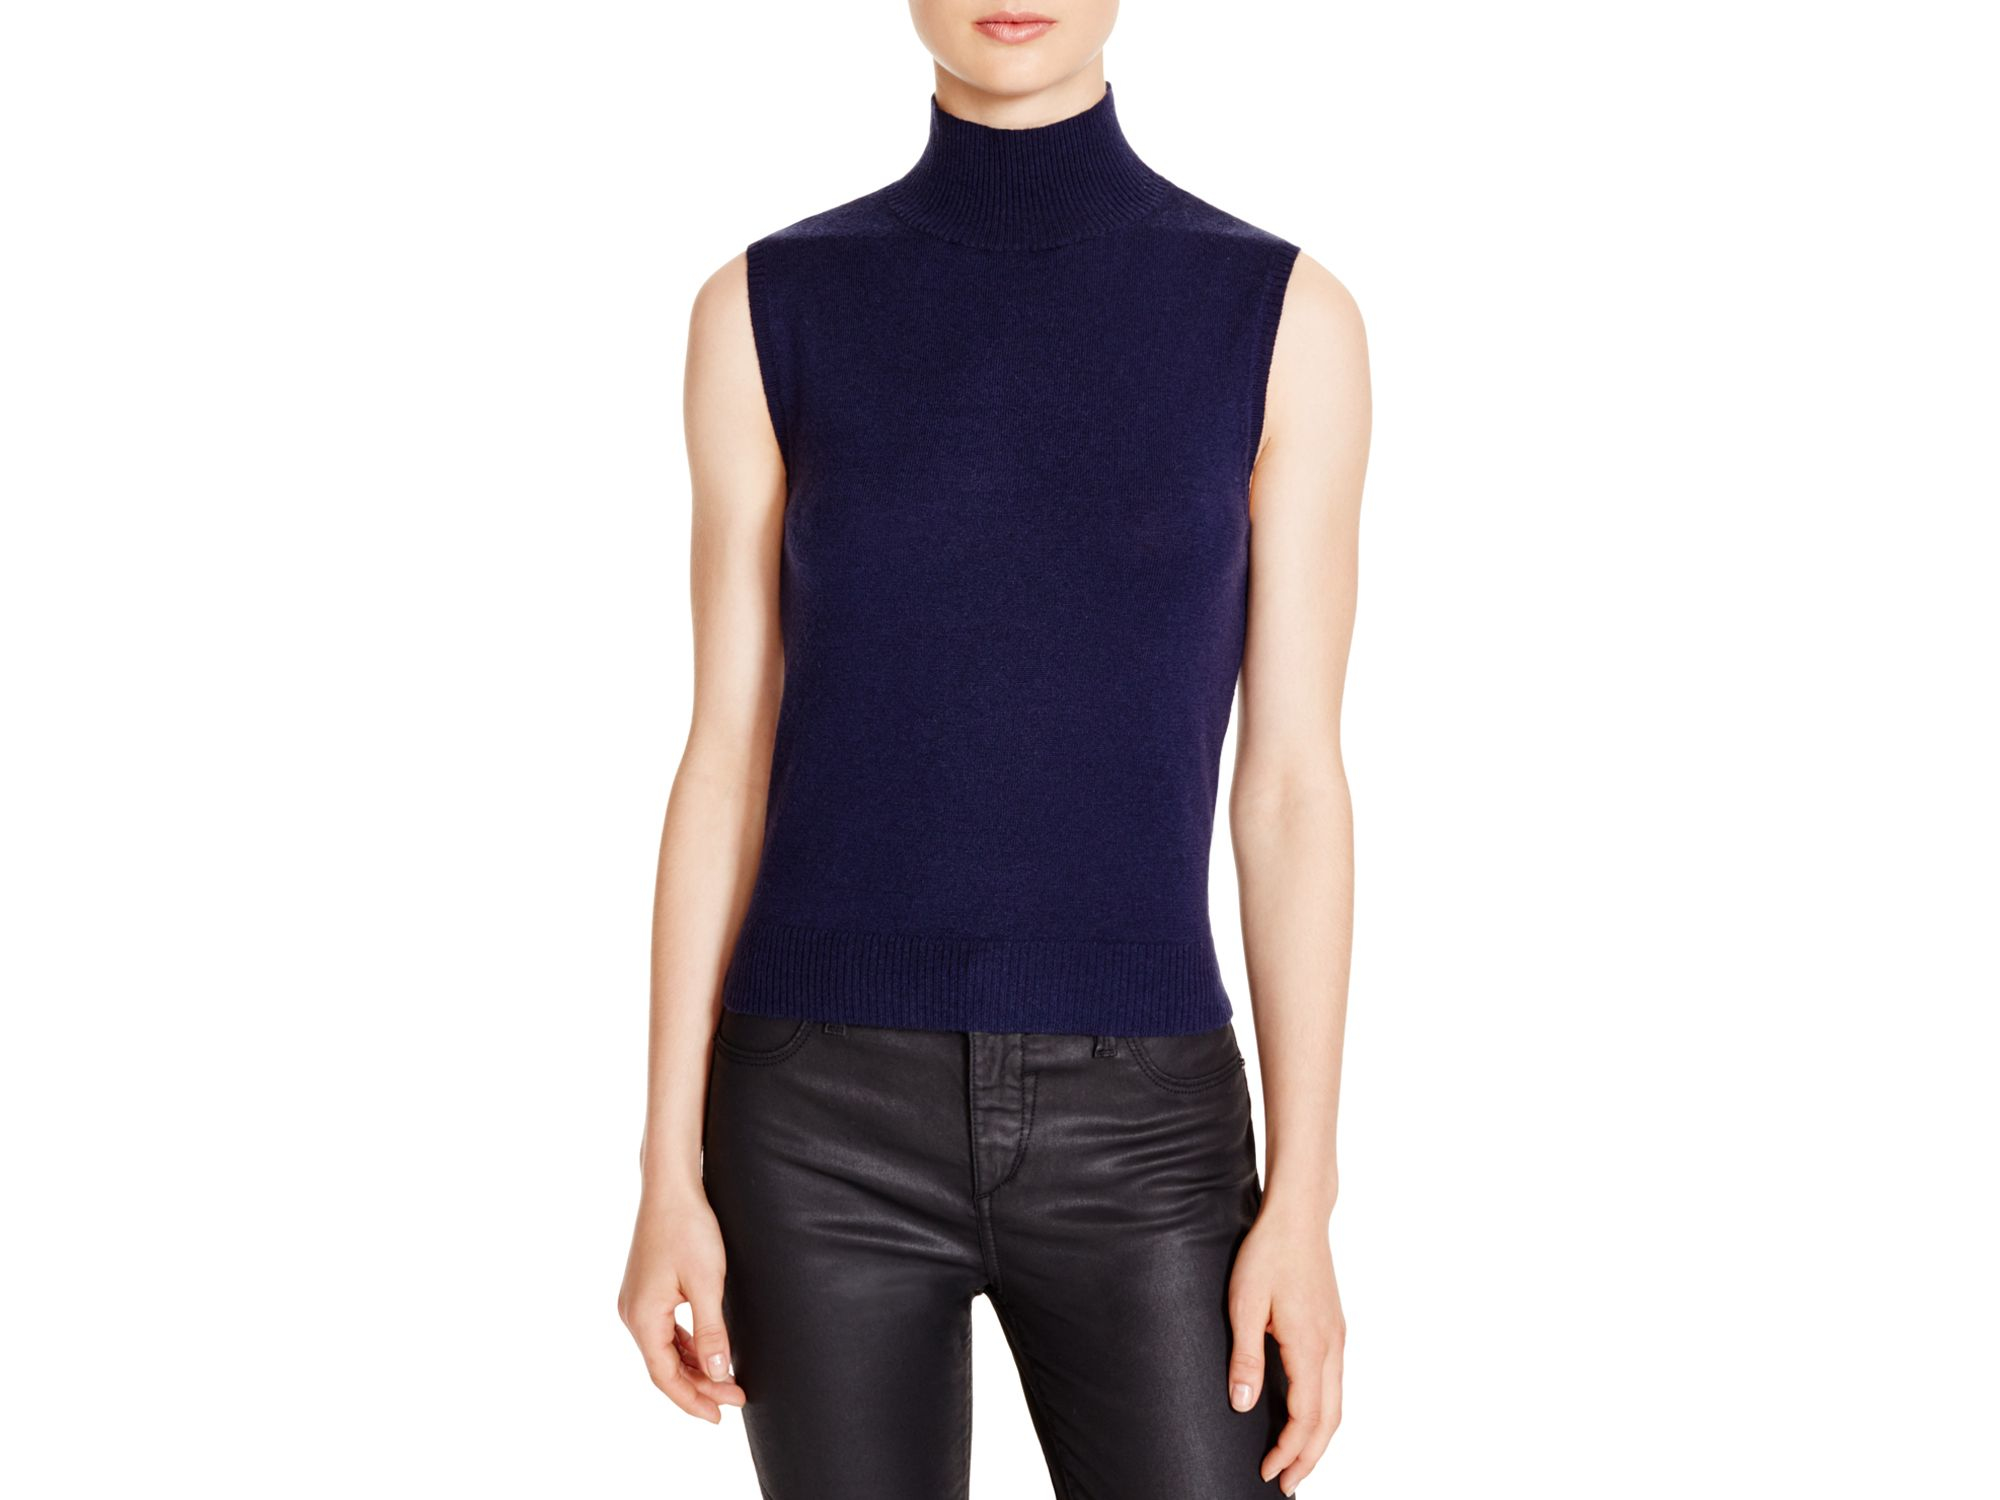 Timo weiland Sleeveless Turtleneck Sweater in Blue | Lyst